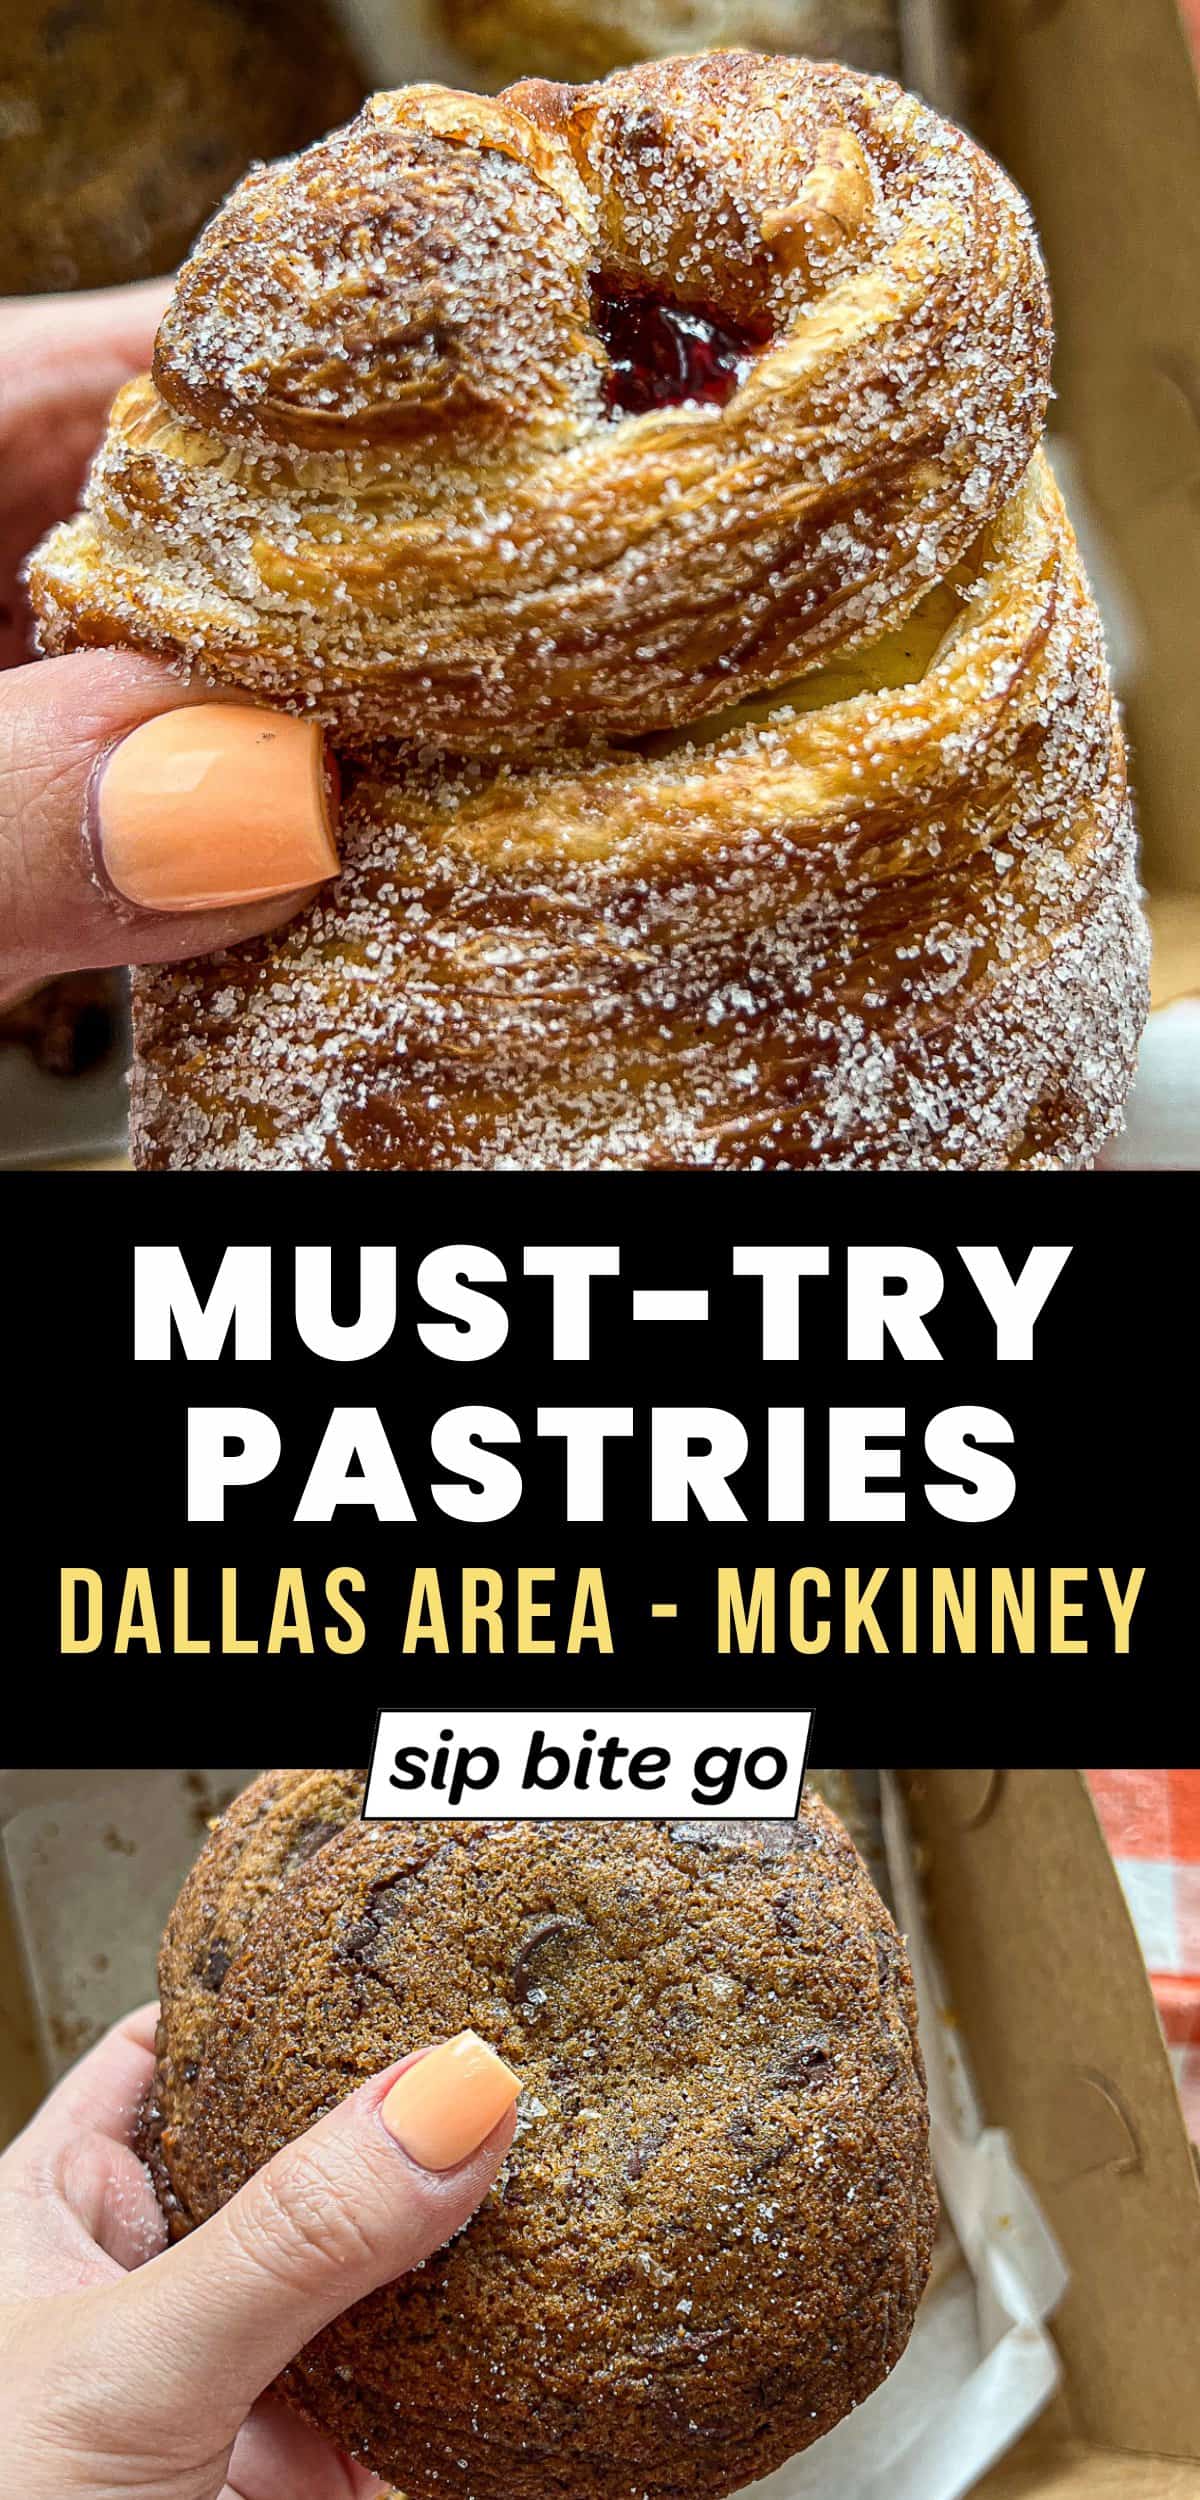 Holding Pastries in McKinney Texas with text overlay and Sip Bite Go logo